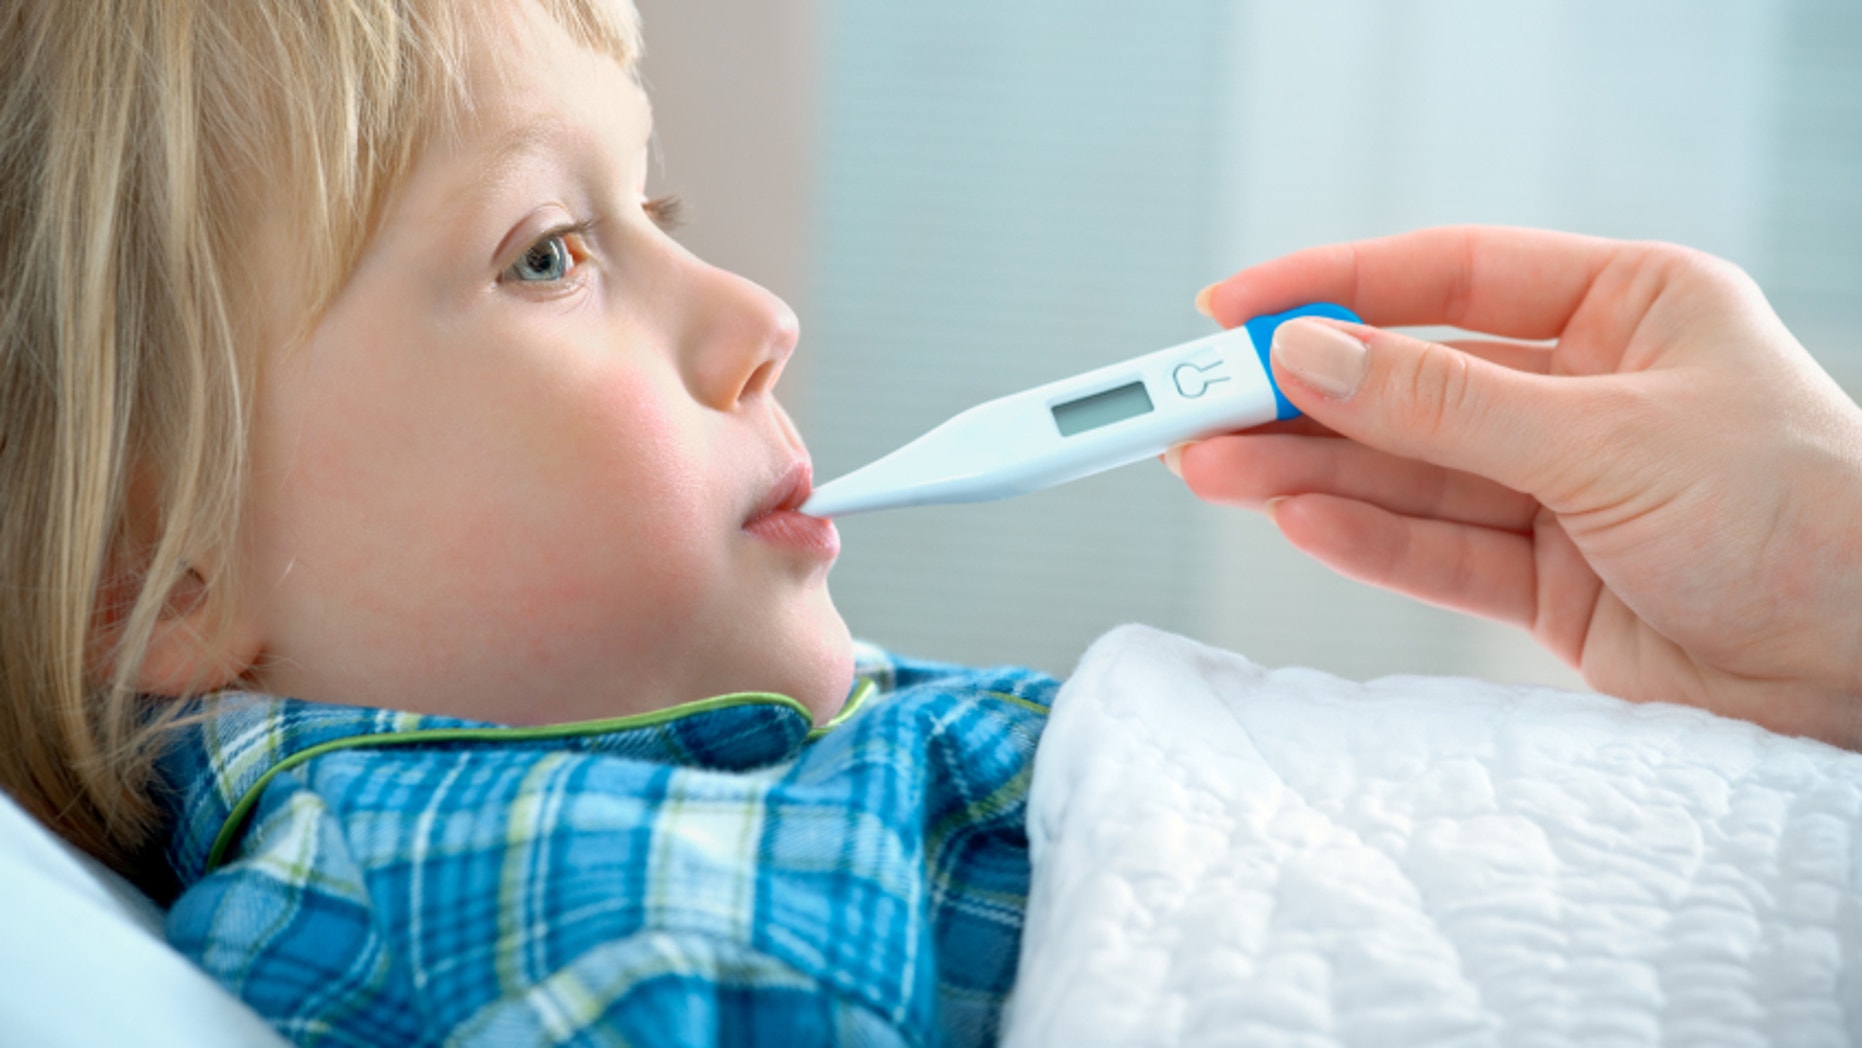 What Thermometer Reading Is A Fever